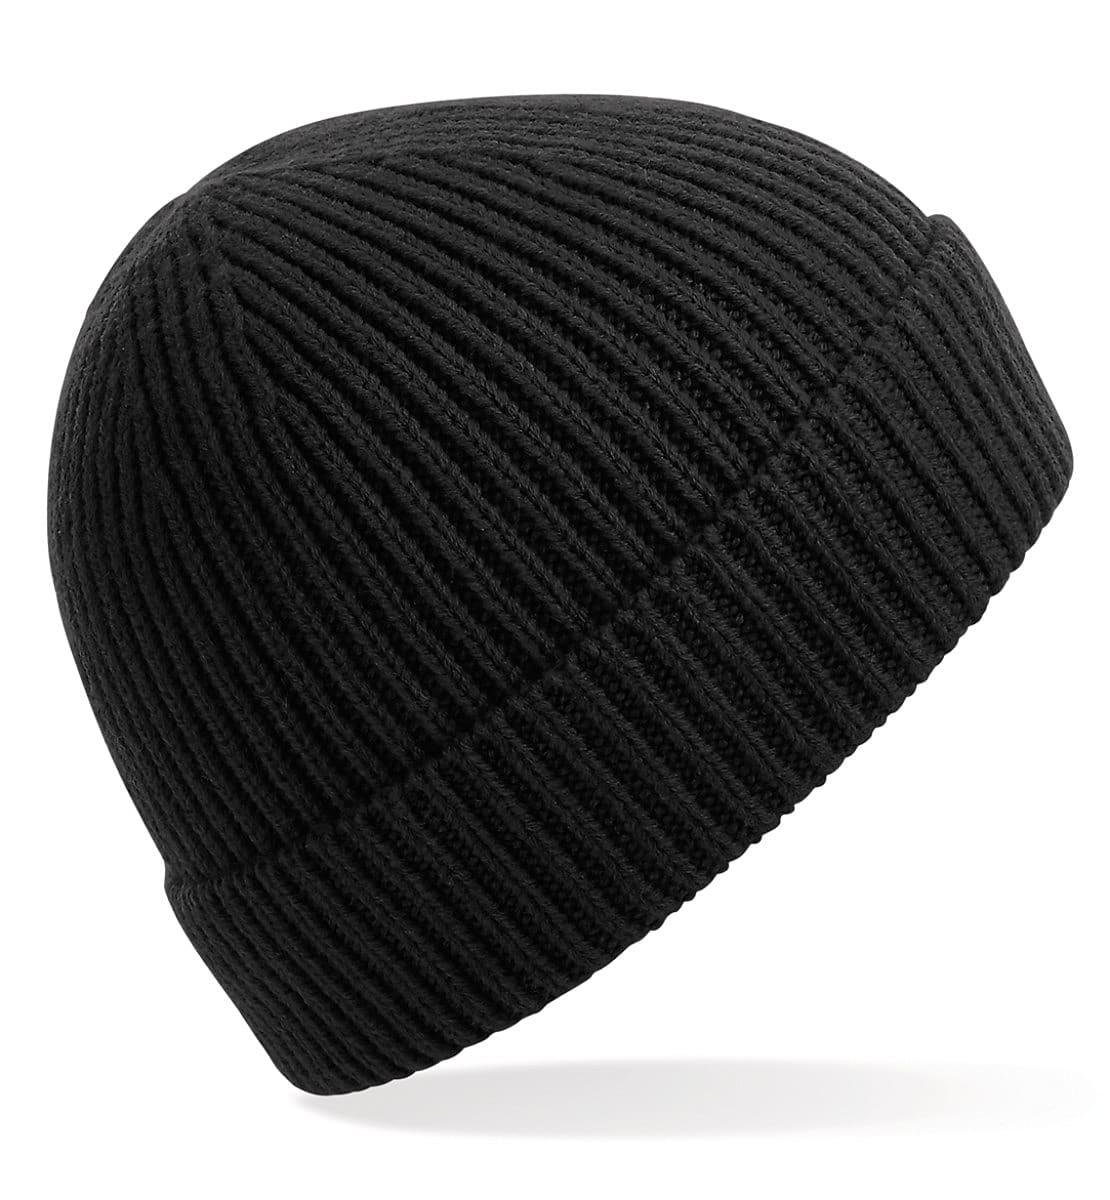 Beechfield Engineered Knit Ribbed Beanie Hat in Black (Product Code: B380)